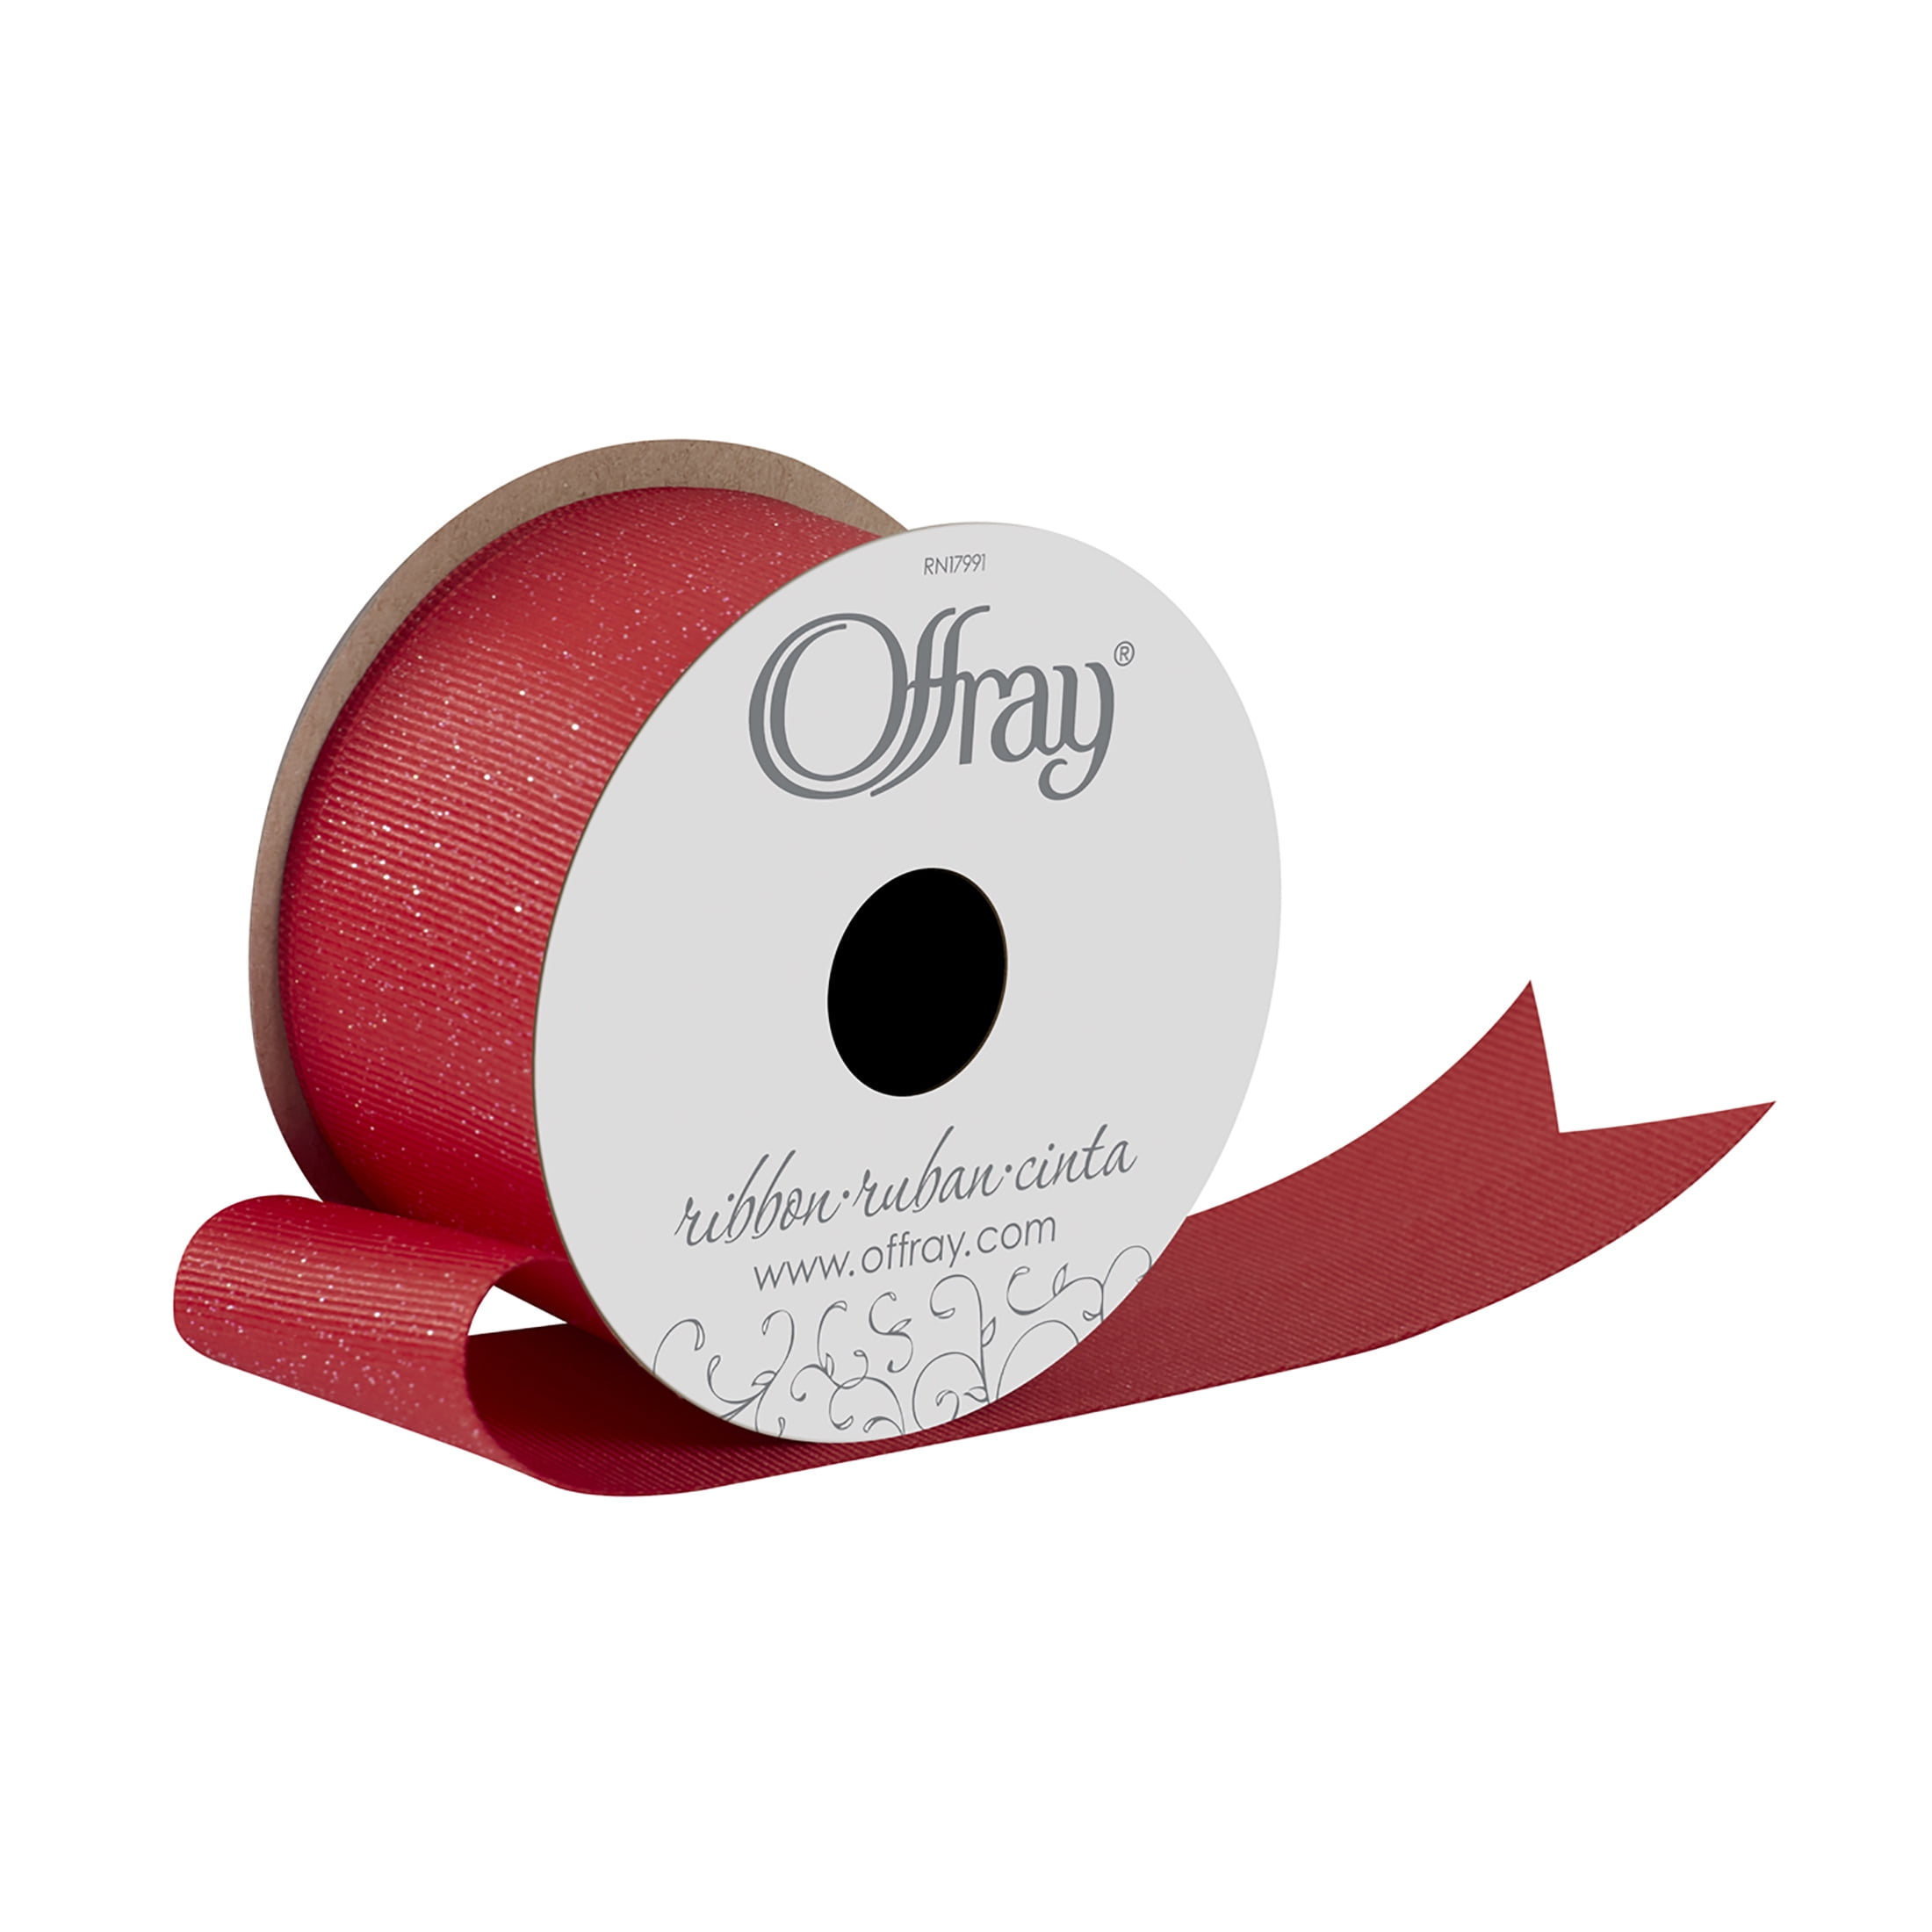 Offray Ribbon, Red 1 1/2 inch Grosgrain Glitter Polyester Ribbon for Sewing, Crafts, and Gifting, 9 feet, 1 Each